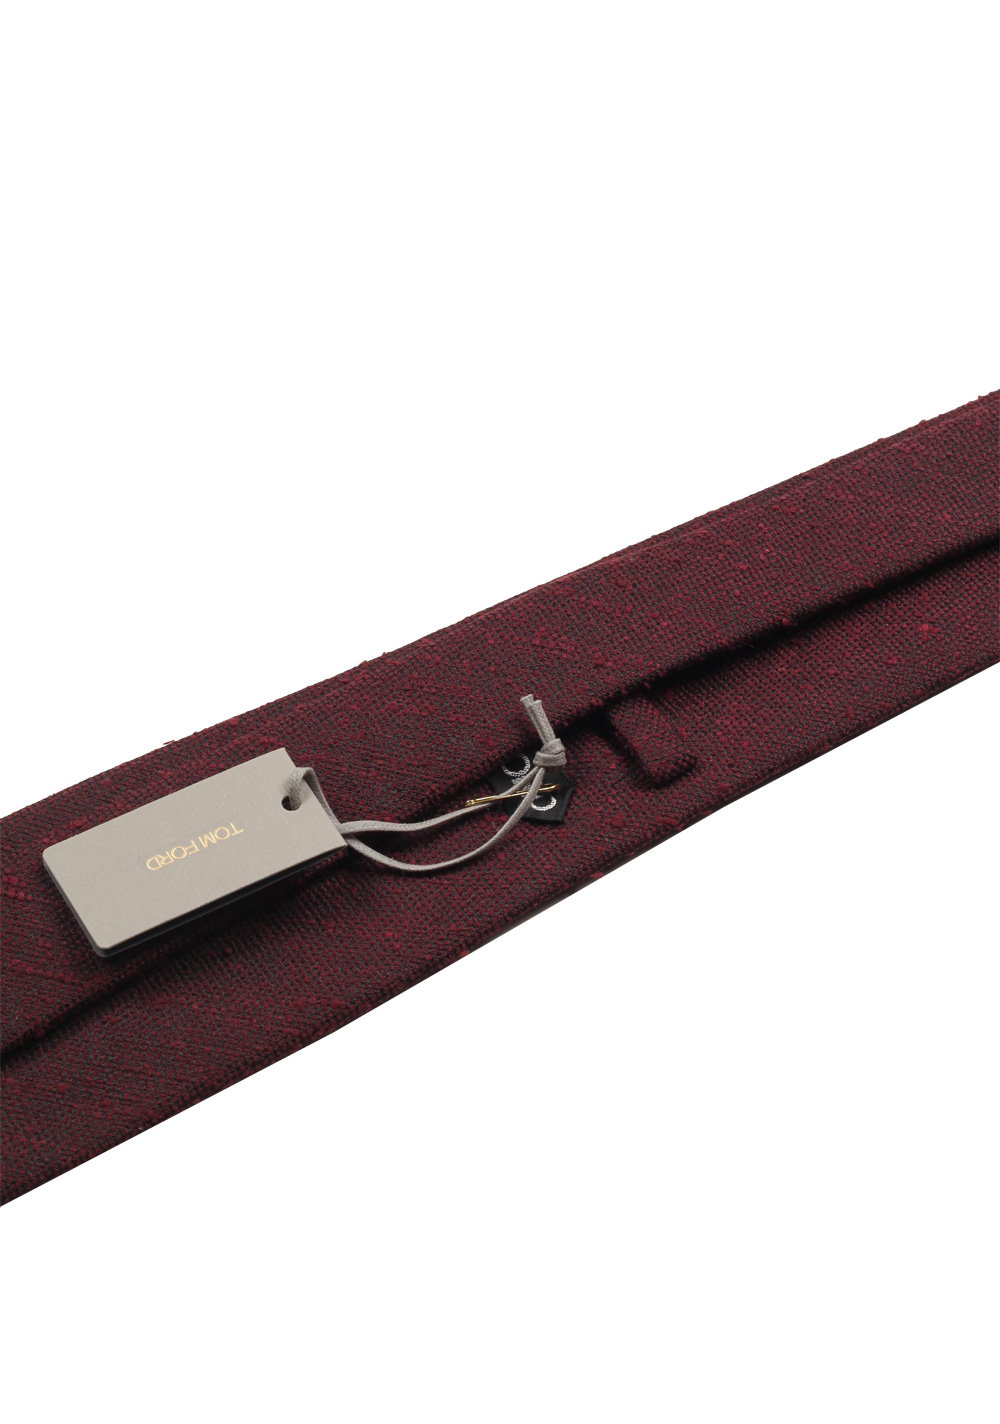 TOM FORD Patterned Burgundy Tie In Silk | Costume Limité